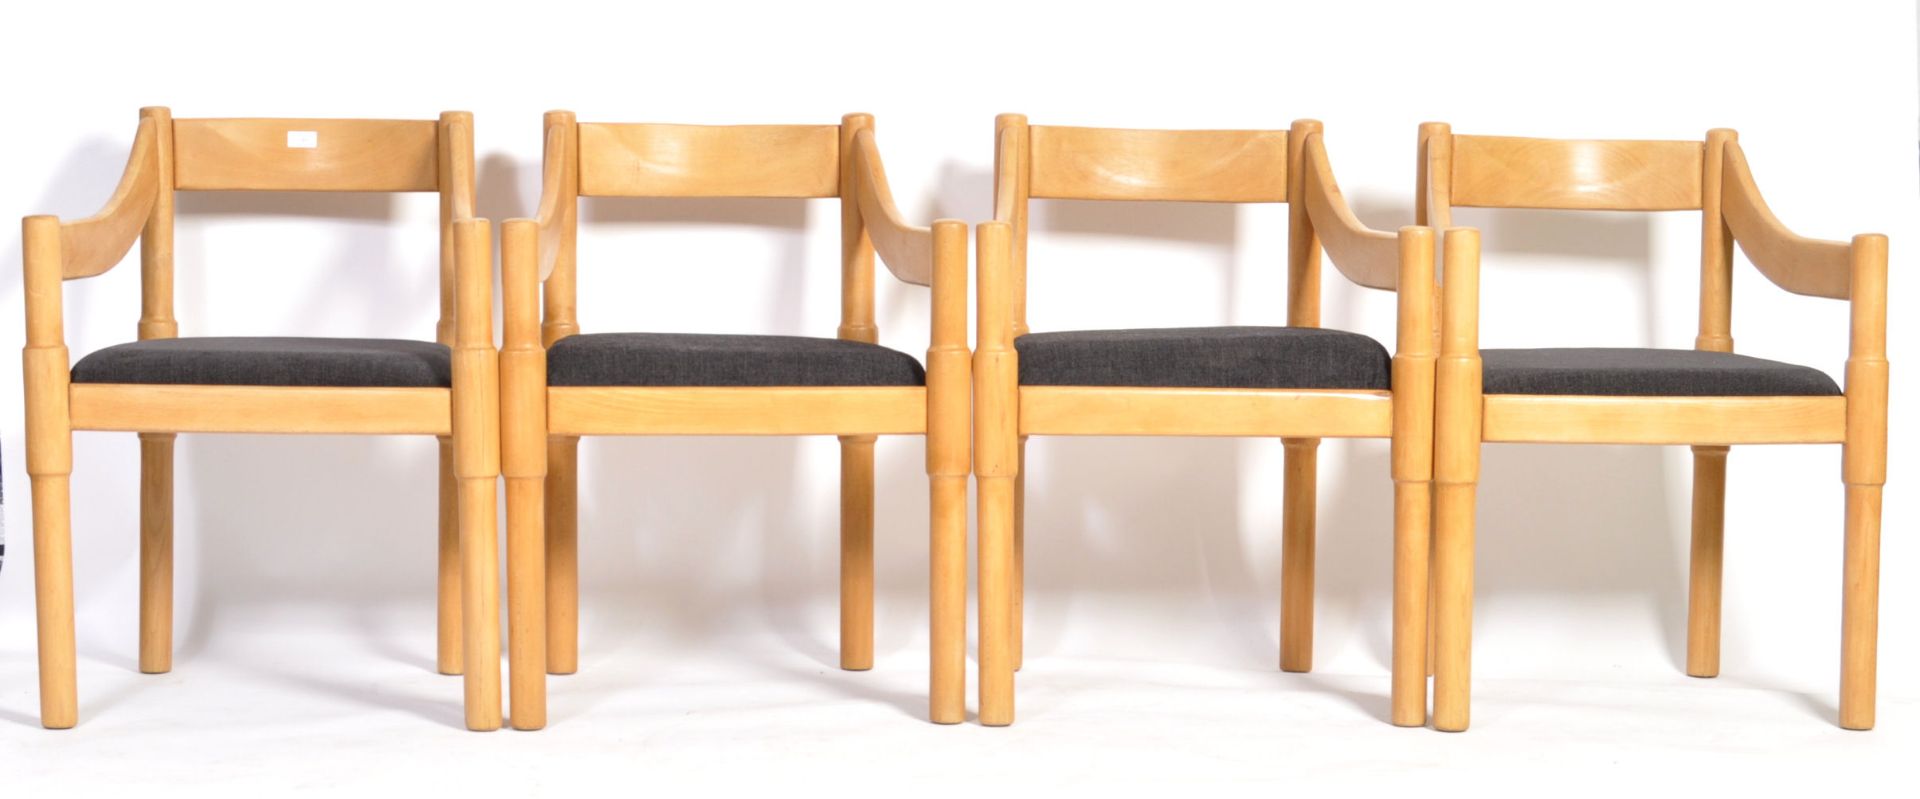 SET OF FOUR CARIMATE CARVER ARMCHAIRS BY VICO MAGISTRETTI